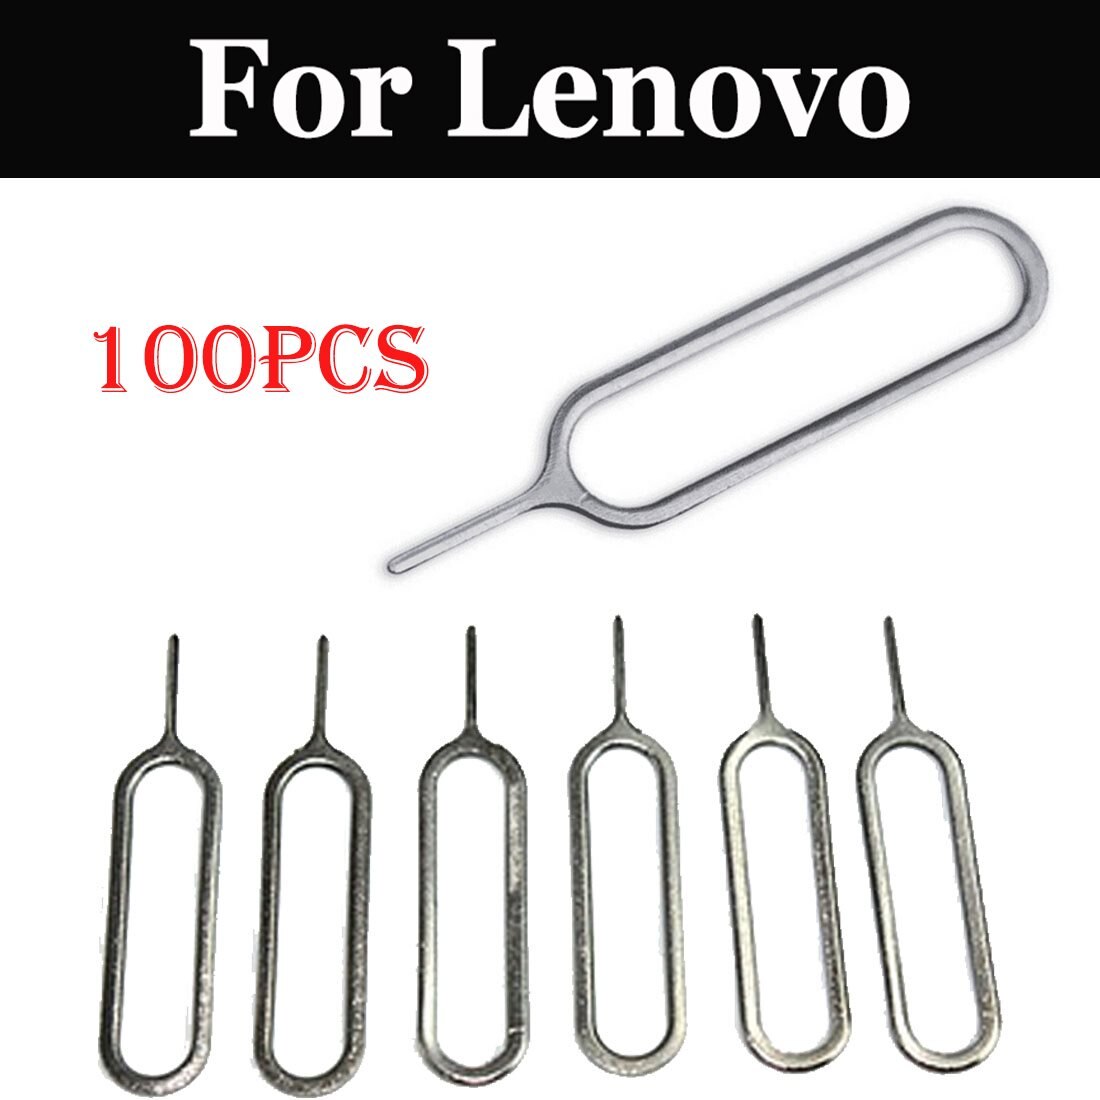 100 pcs SIM Card Tray Removal Eject Pin Key Tool Roestvrij Voor Lenovo Moto G4 G5 Plus G5s G5 G5s plus S5 K5 Note S5 Pro Z5 K5 Pro